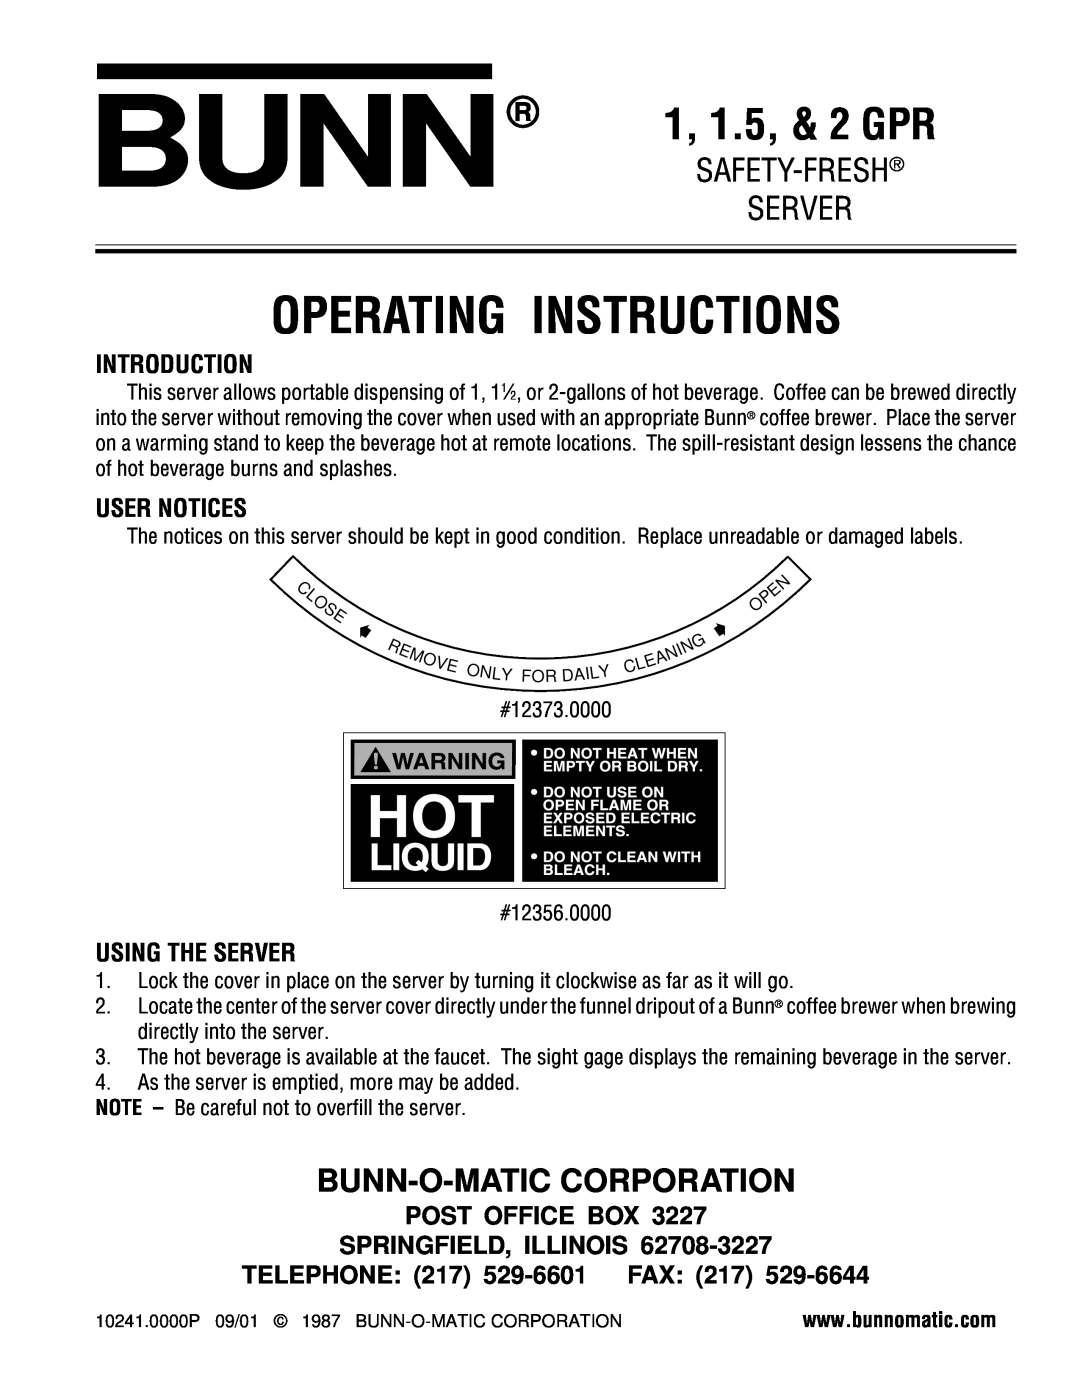 Bunn 1 GPR manual Safety-Fresh, Introduction, User Notices, Using The Server, Post Office Box Springfield, Illinois, Bunn 